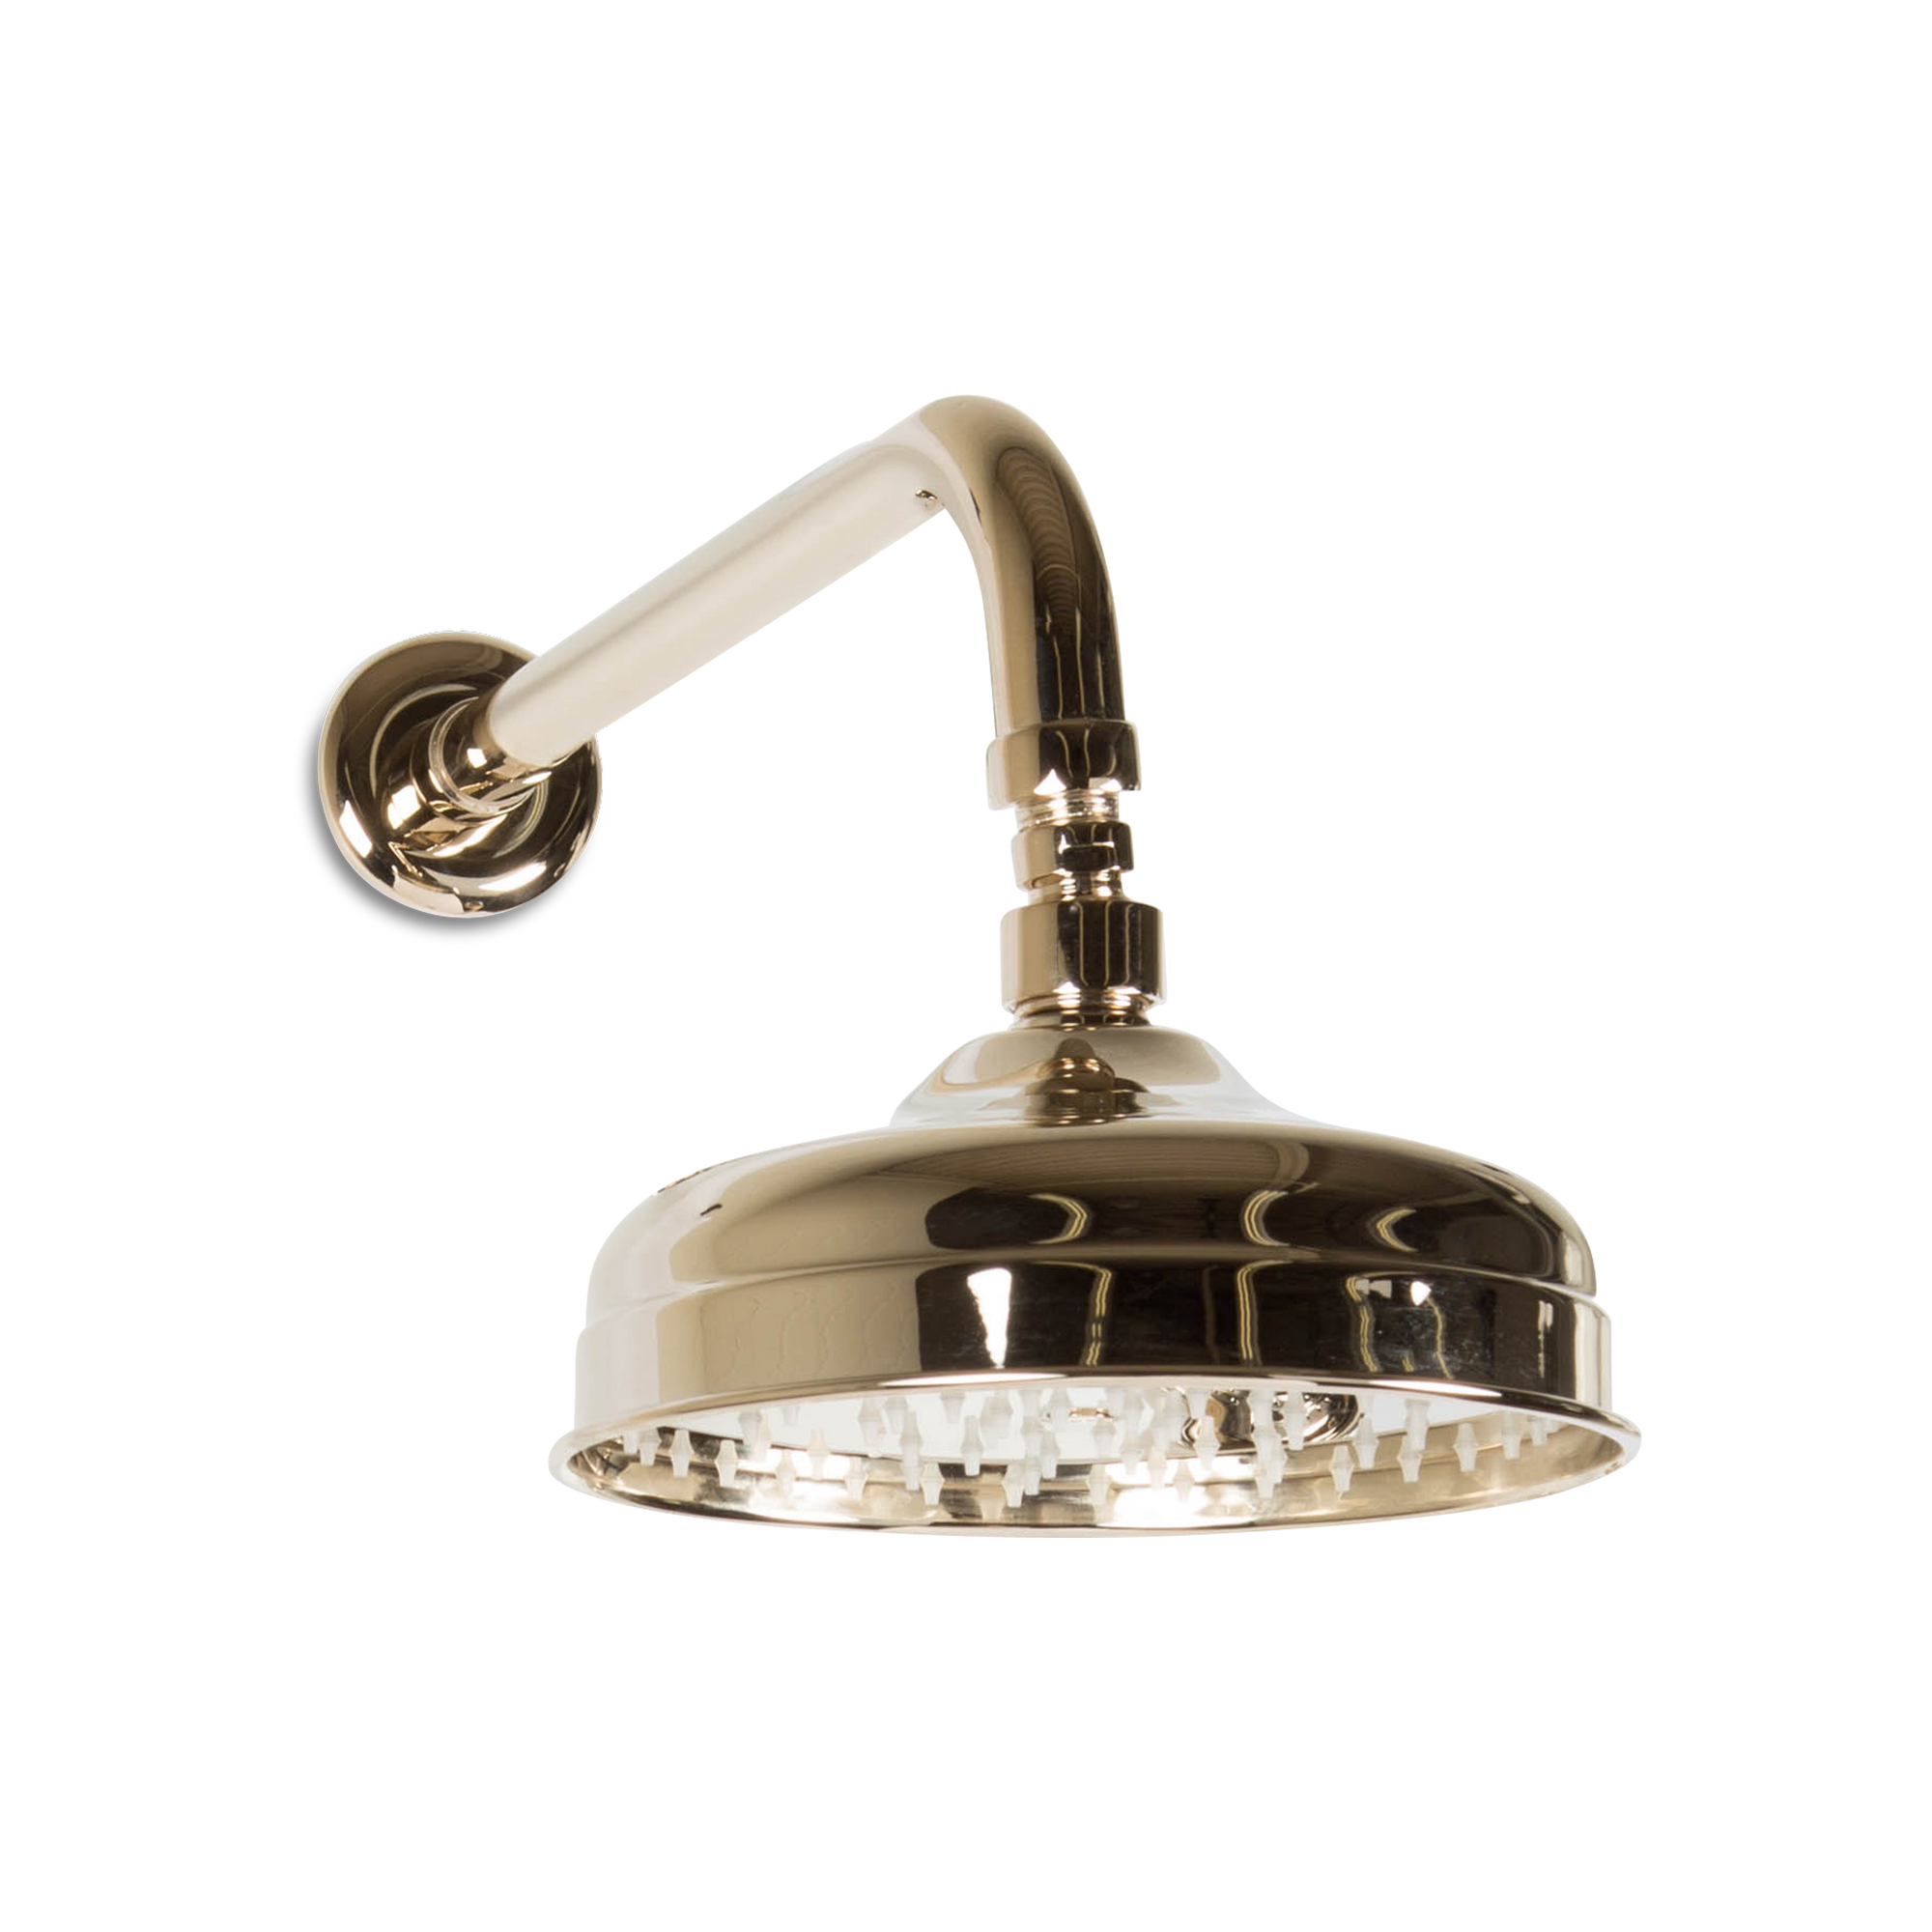 A traditional, elegant piece, the Regal Shower Head is sleek and detailed with a ridged base.